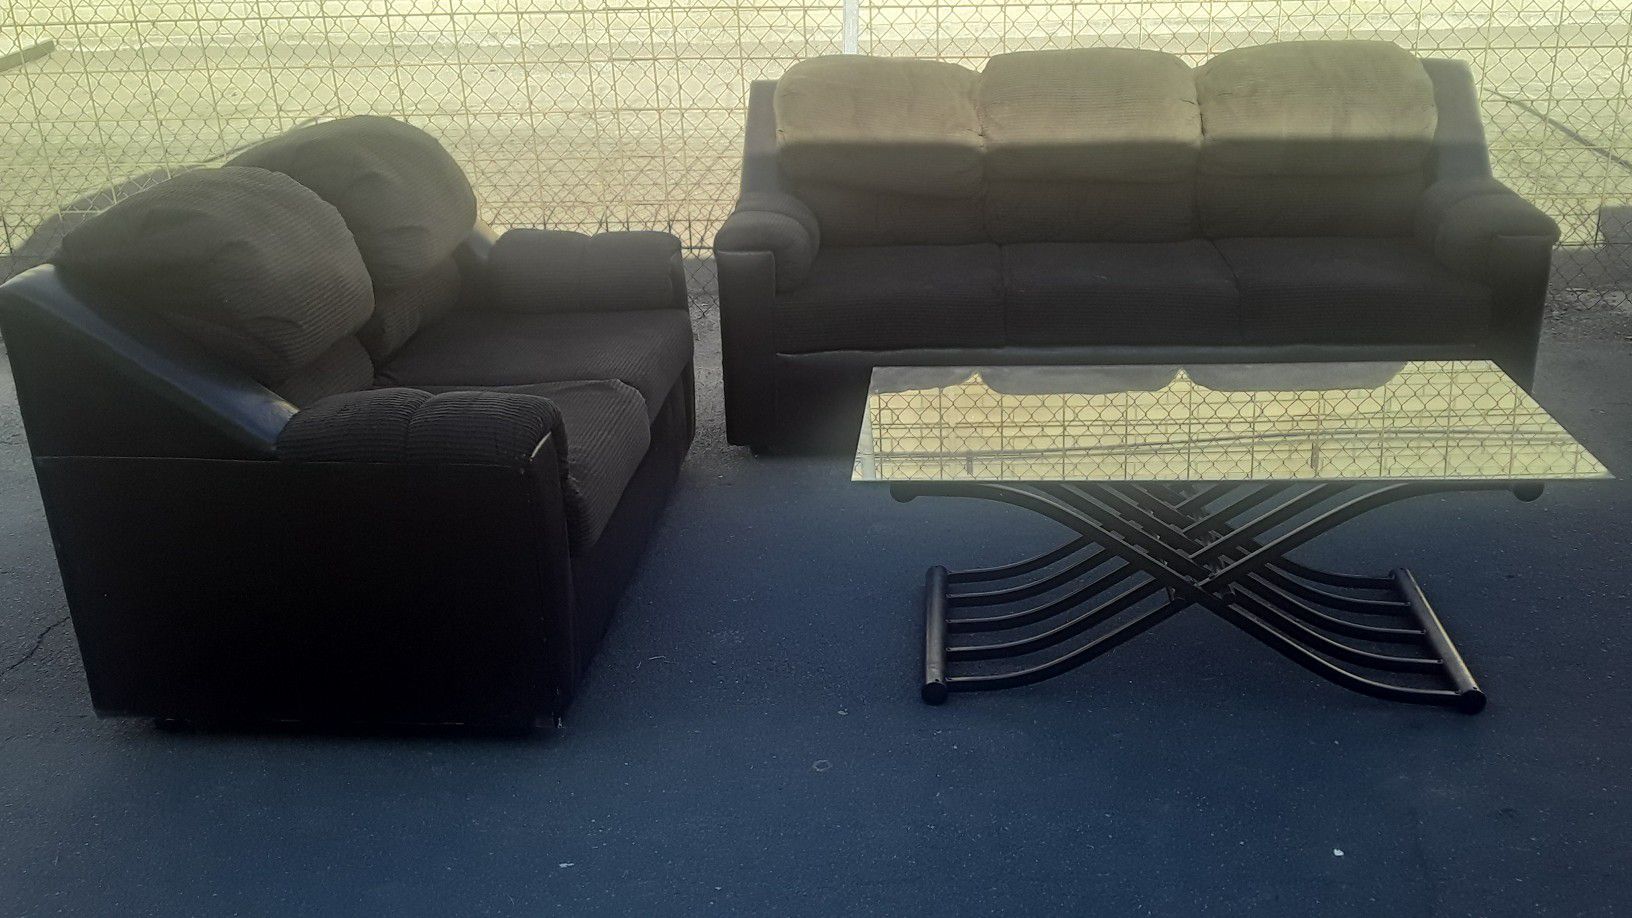 Loveseat and couch and coffee table